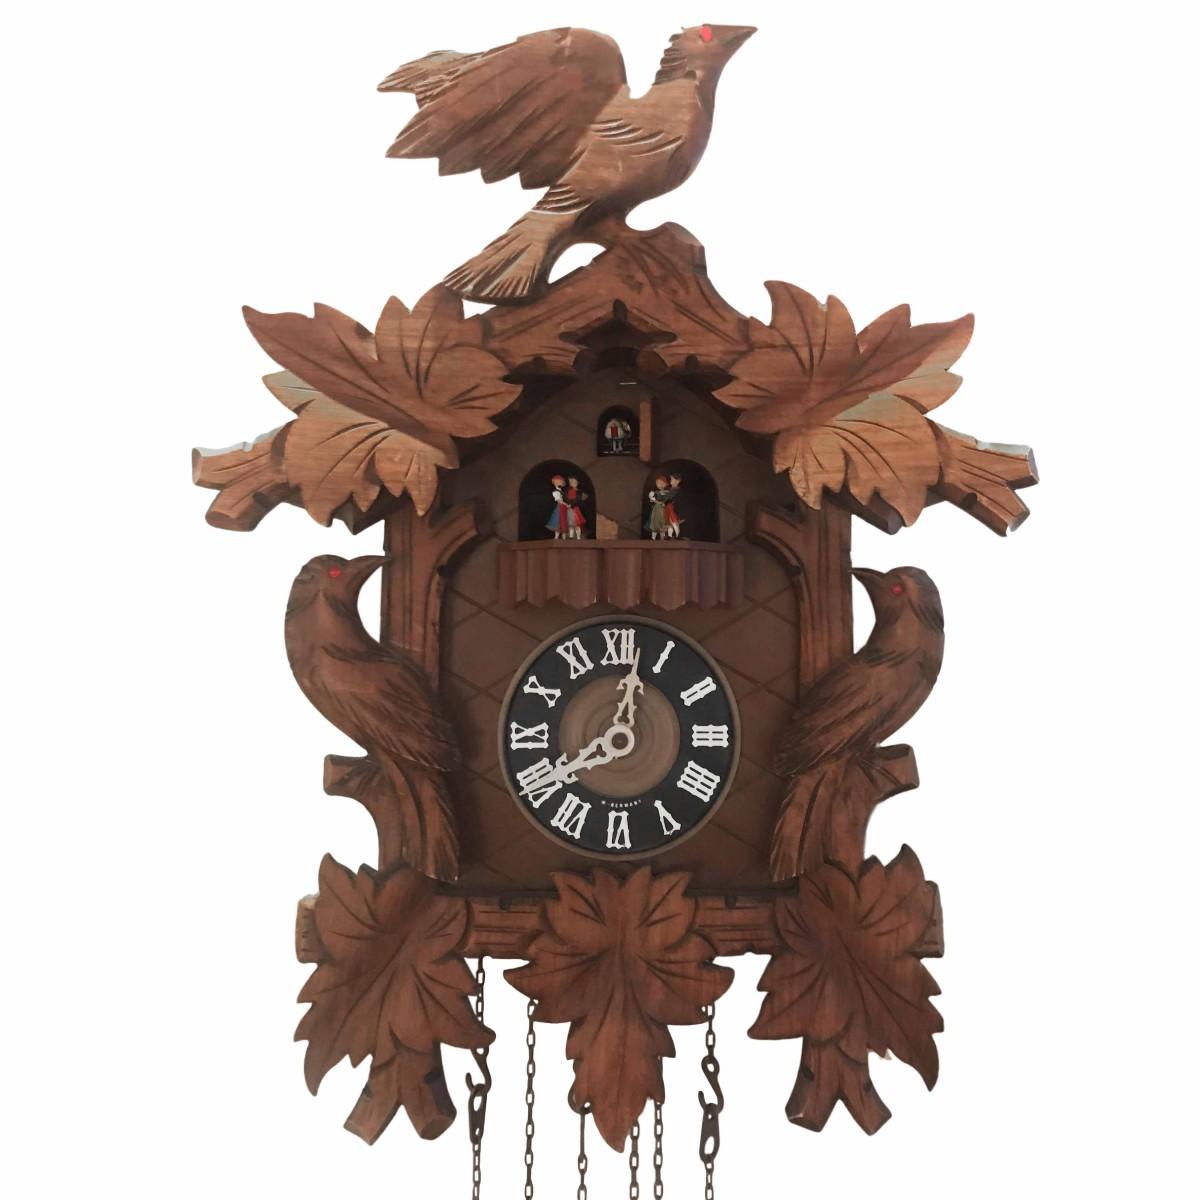 A vintage cuckoo clock. Germany, circa 1950. Designed to hang on wall.

Dimensions: 13 inches L x 8 inches D x 18 inches H.